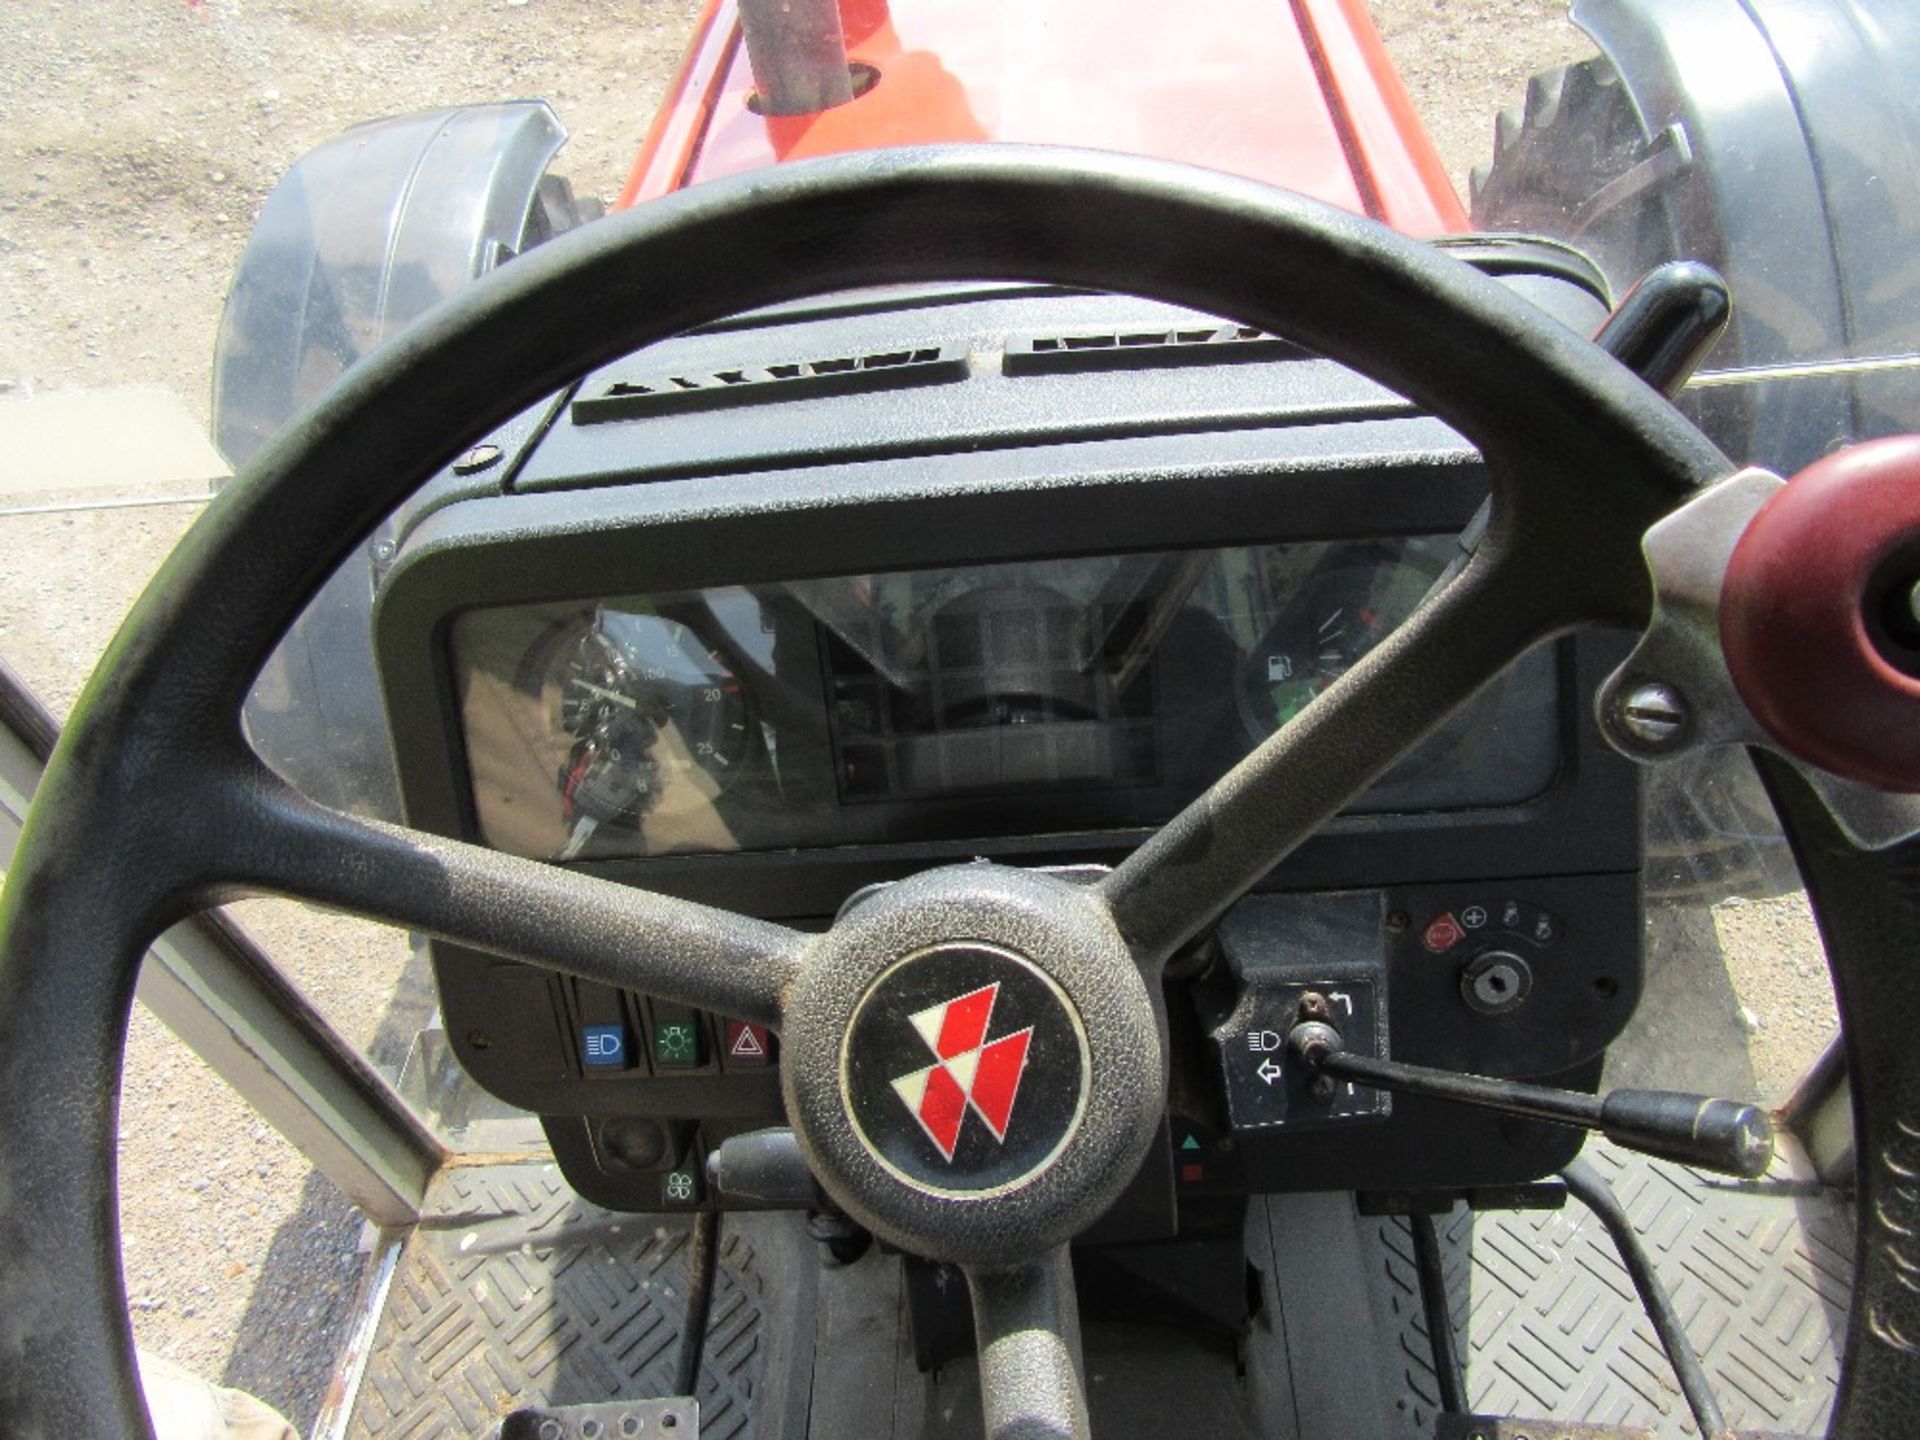 1996 Massey Ferguson 399 Tractor 1 Owner from new. Reg No P946 YSS Ser No E271290 - Image 11 of 13